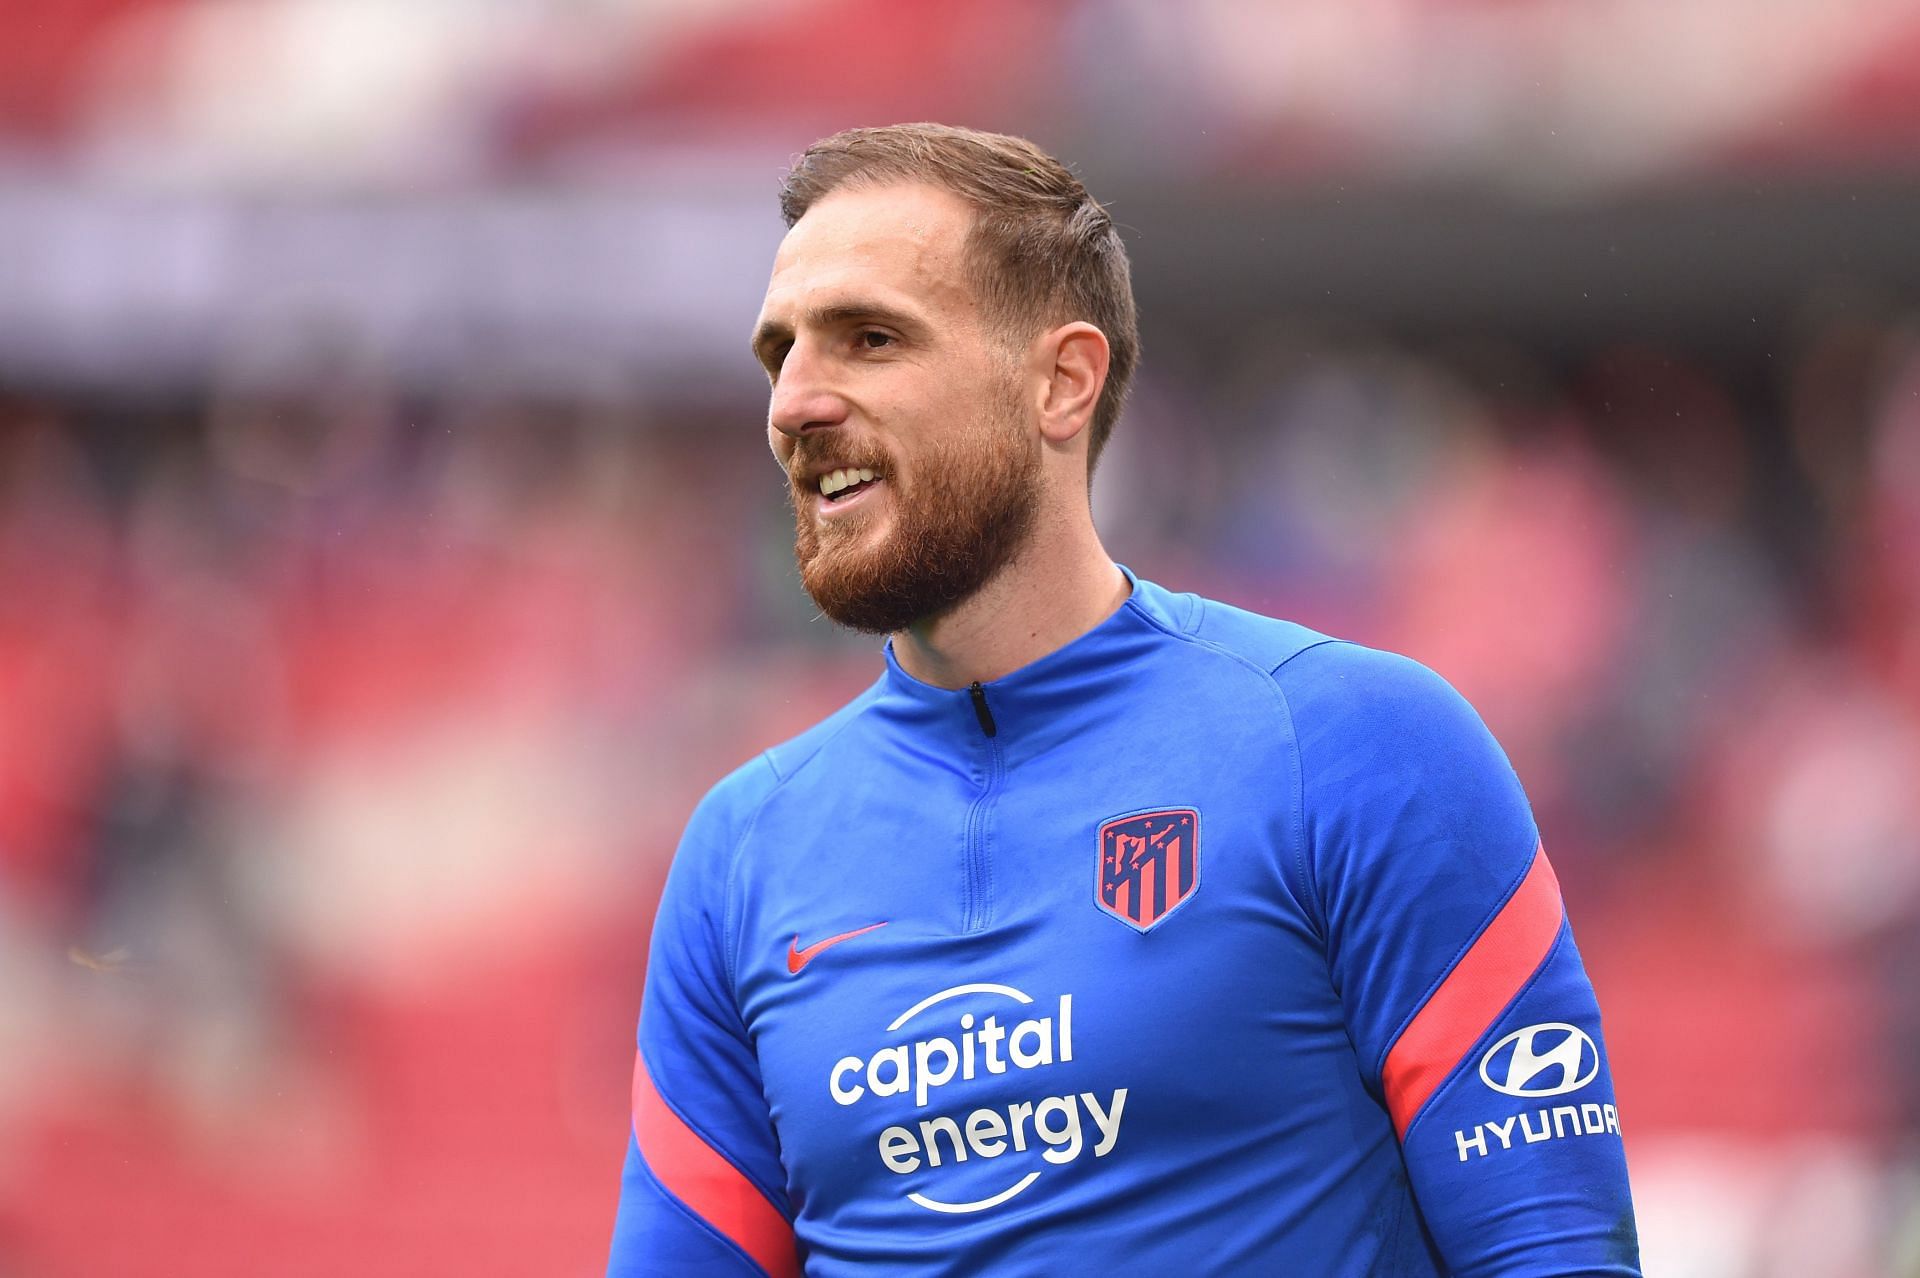 Jan Oblak is one of the best goalkeepers in world football currently.